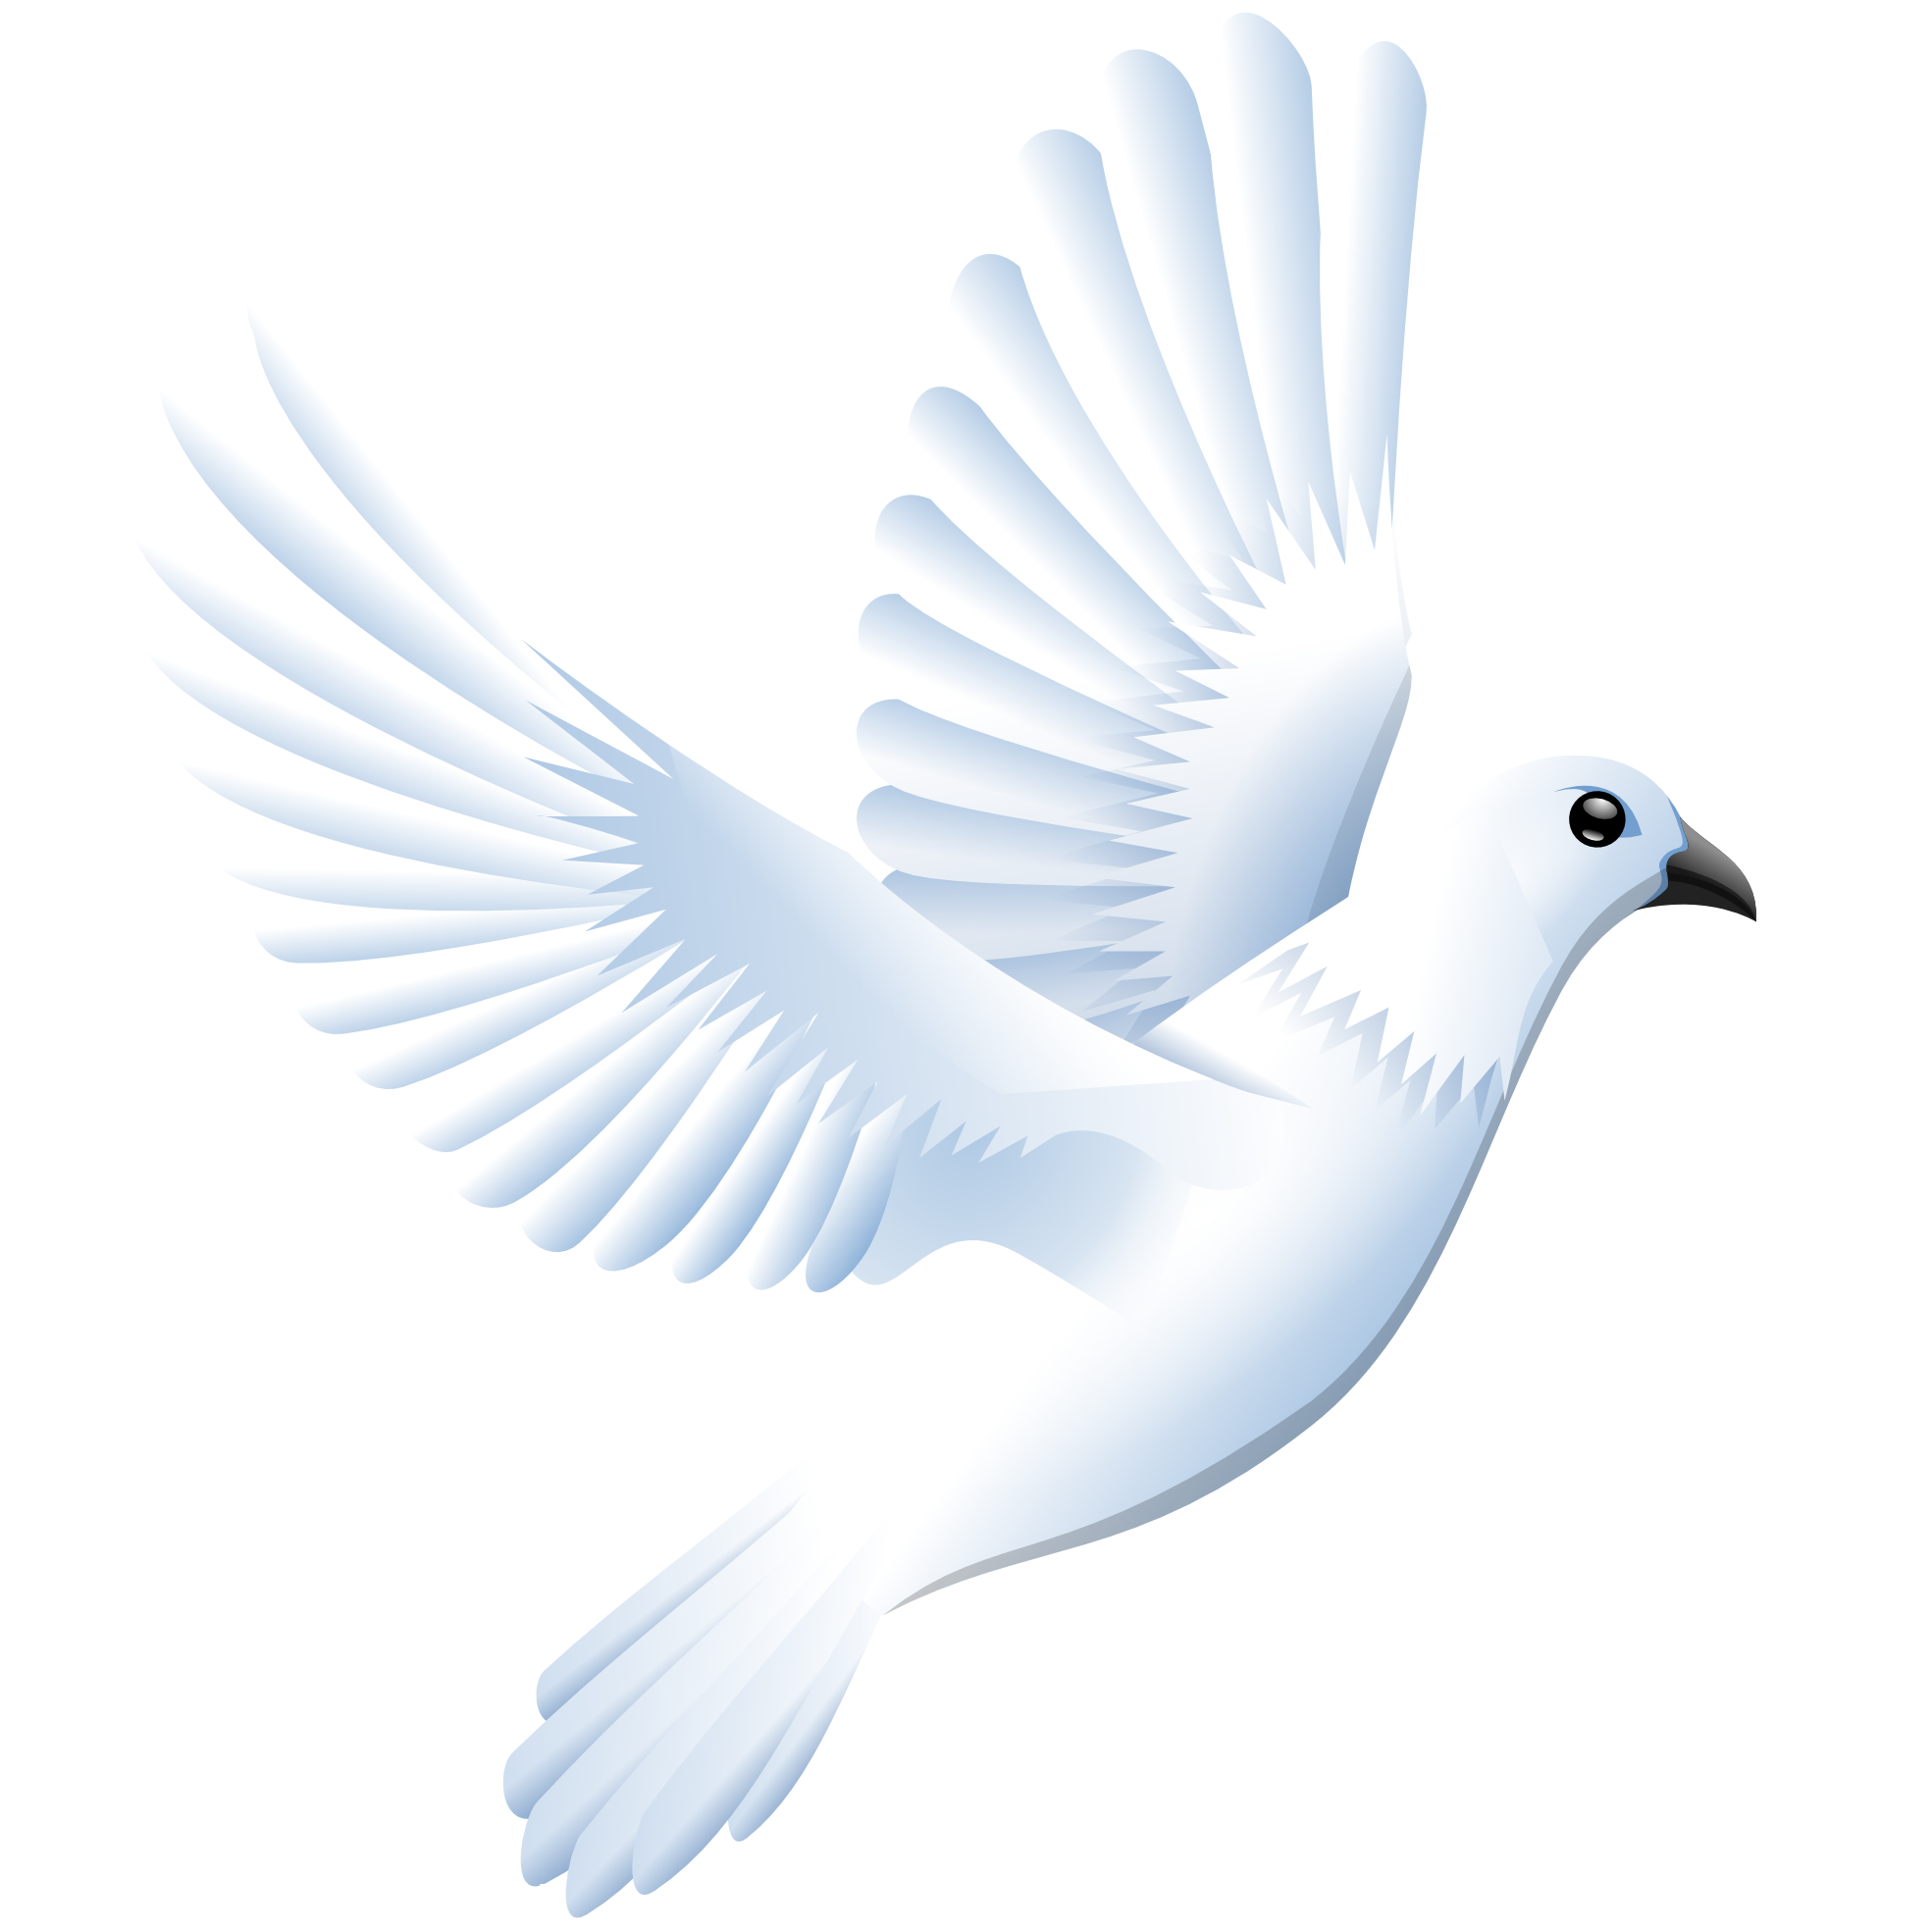 Flying Pigeon Peace Free Transparent Image HQ PNG Image